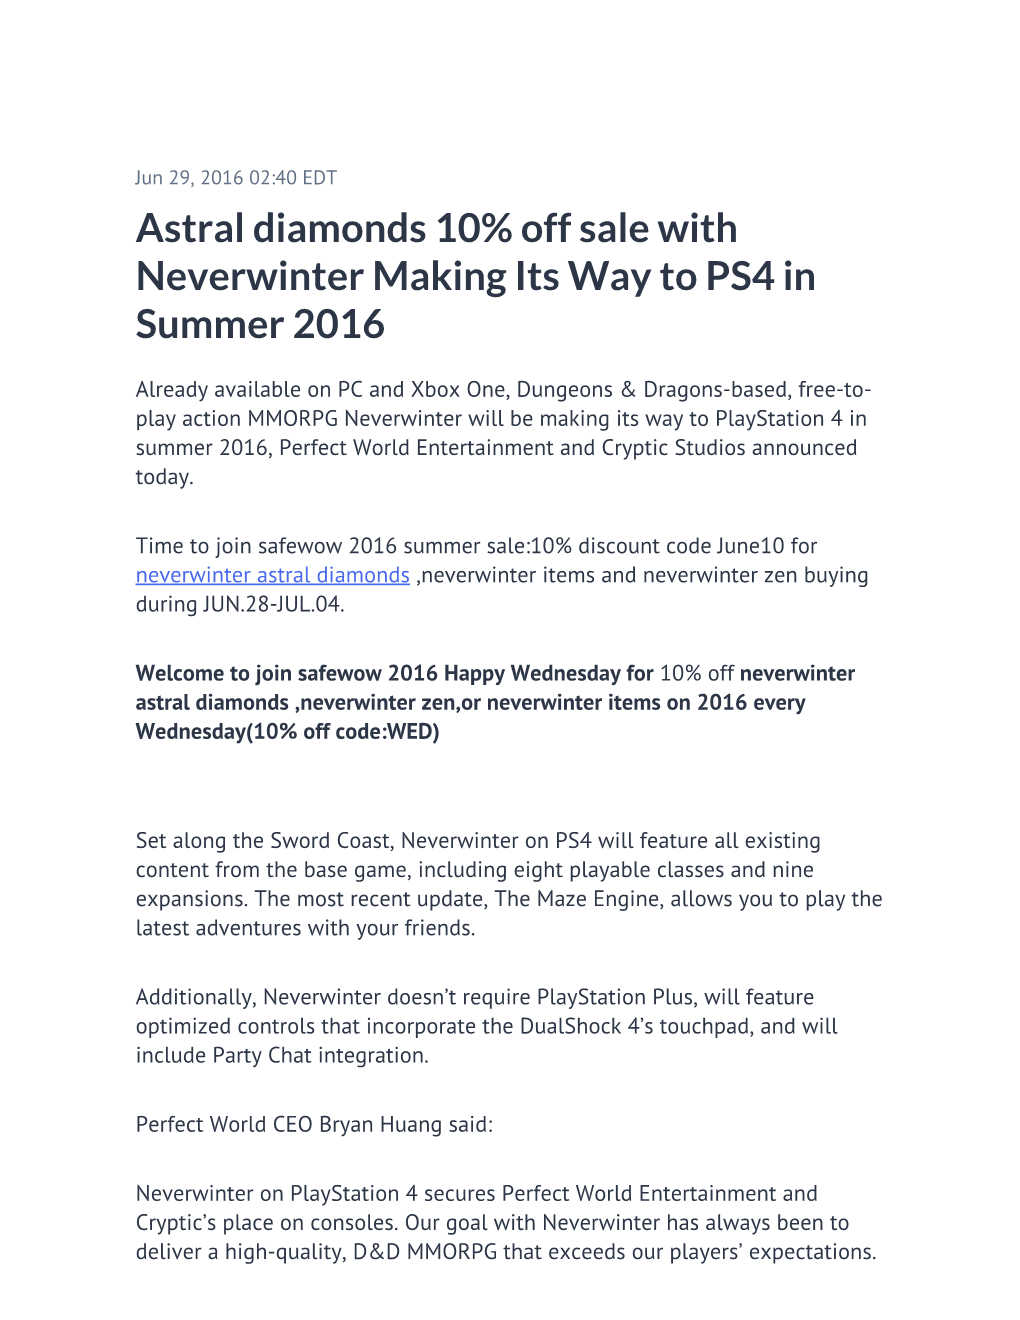 Astral Diamonds 10% Off Sale with Neverwinter Making Its Way to PS4 in Summer 2016